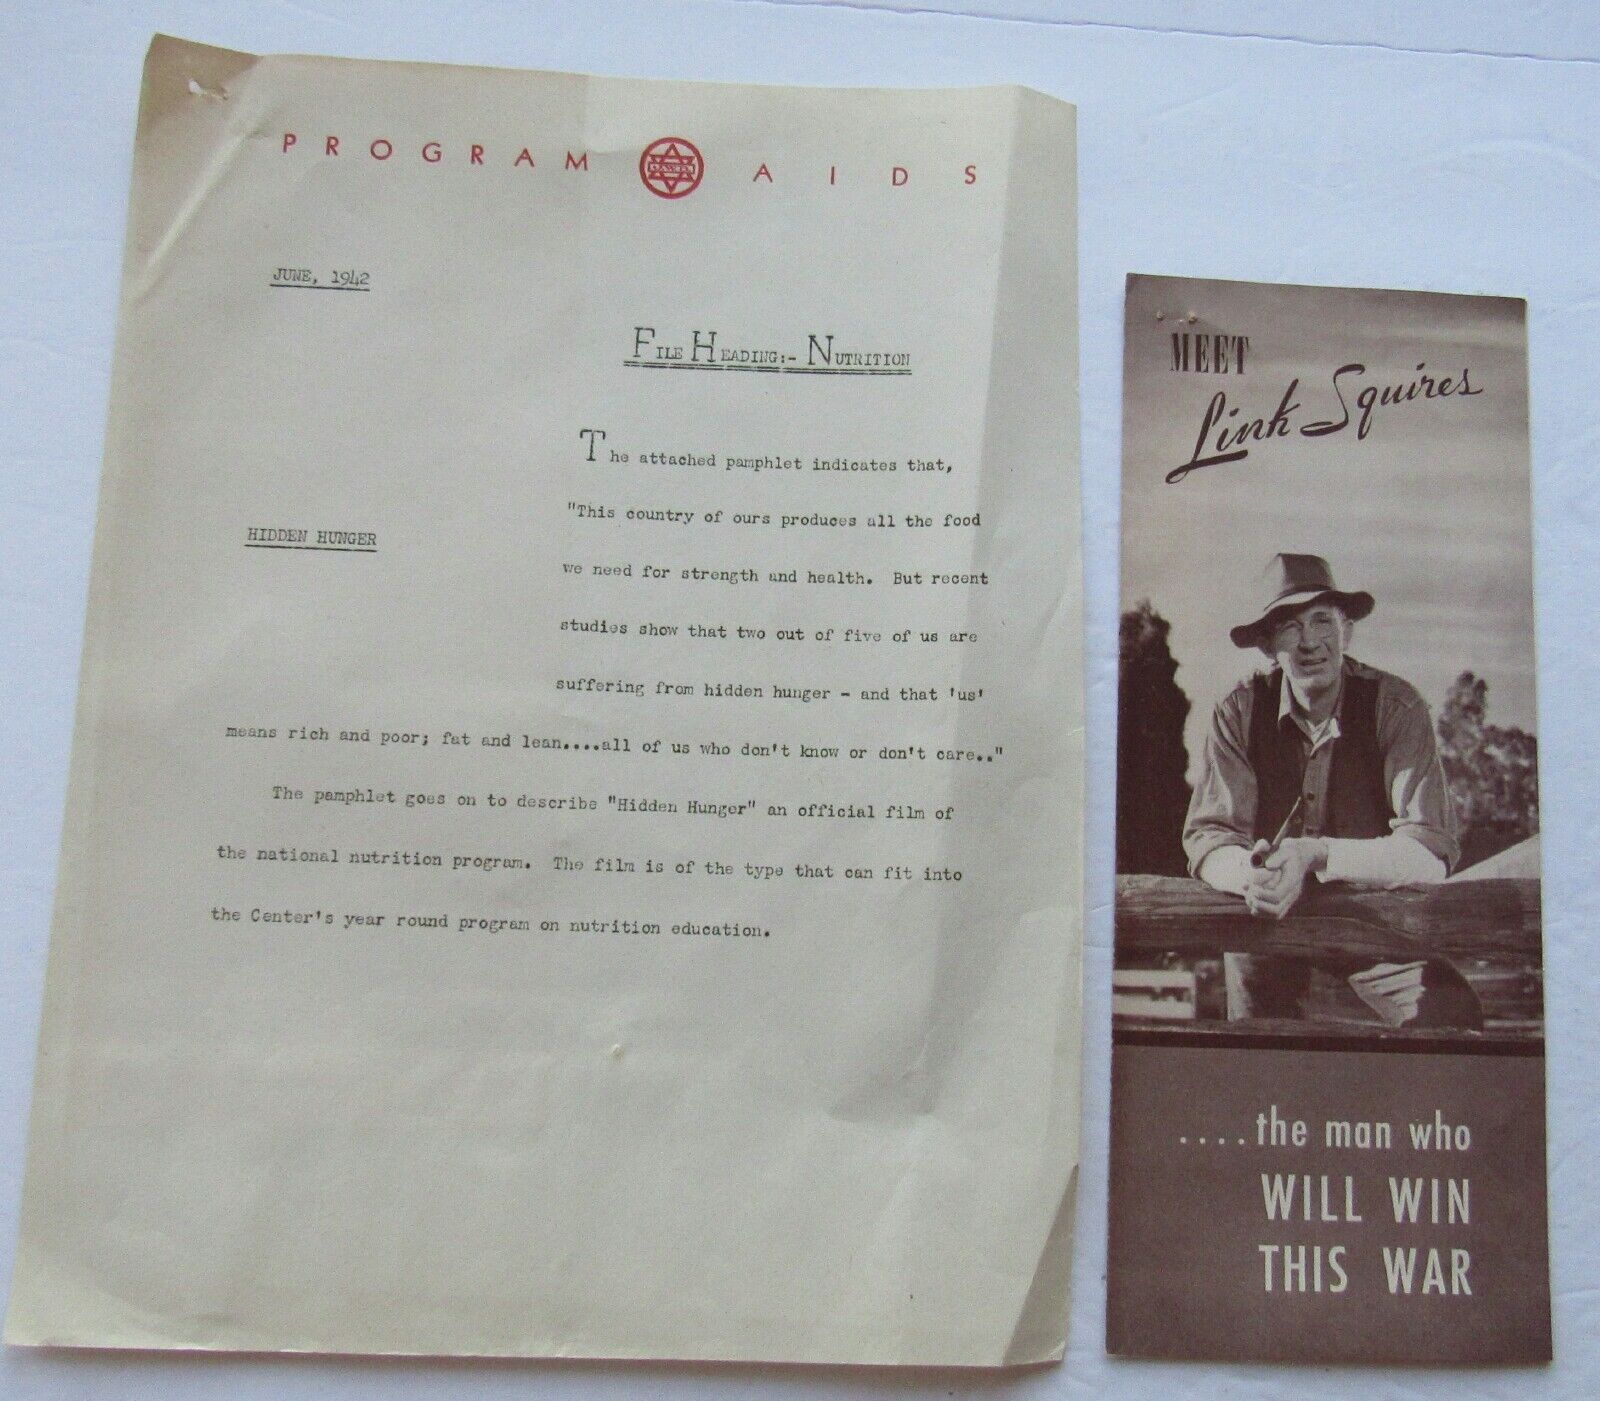 Program Aid wBrochure Meet Link Squires  Man Who will Win this War 1942